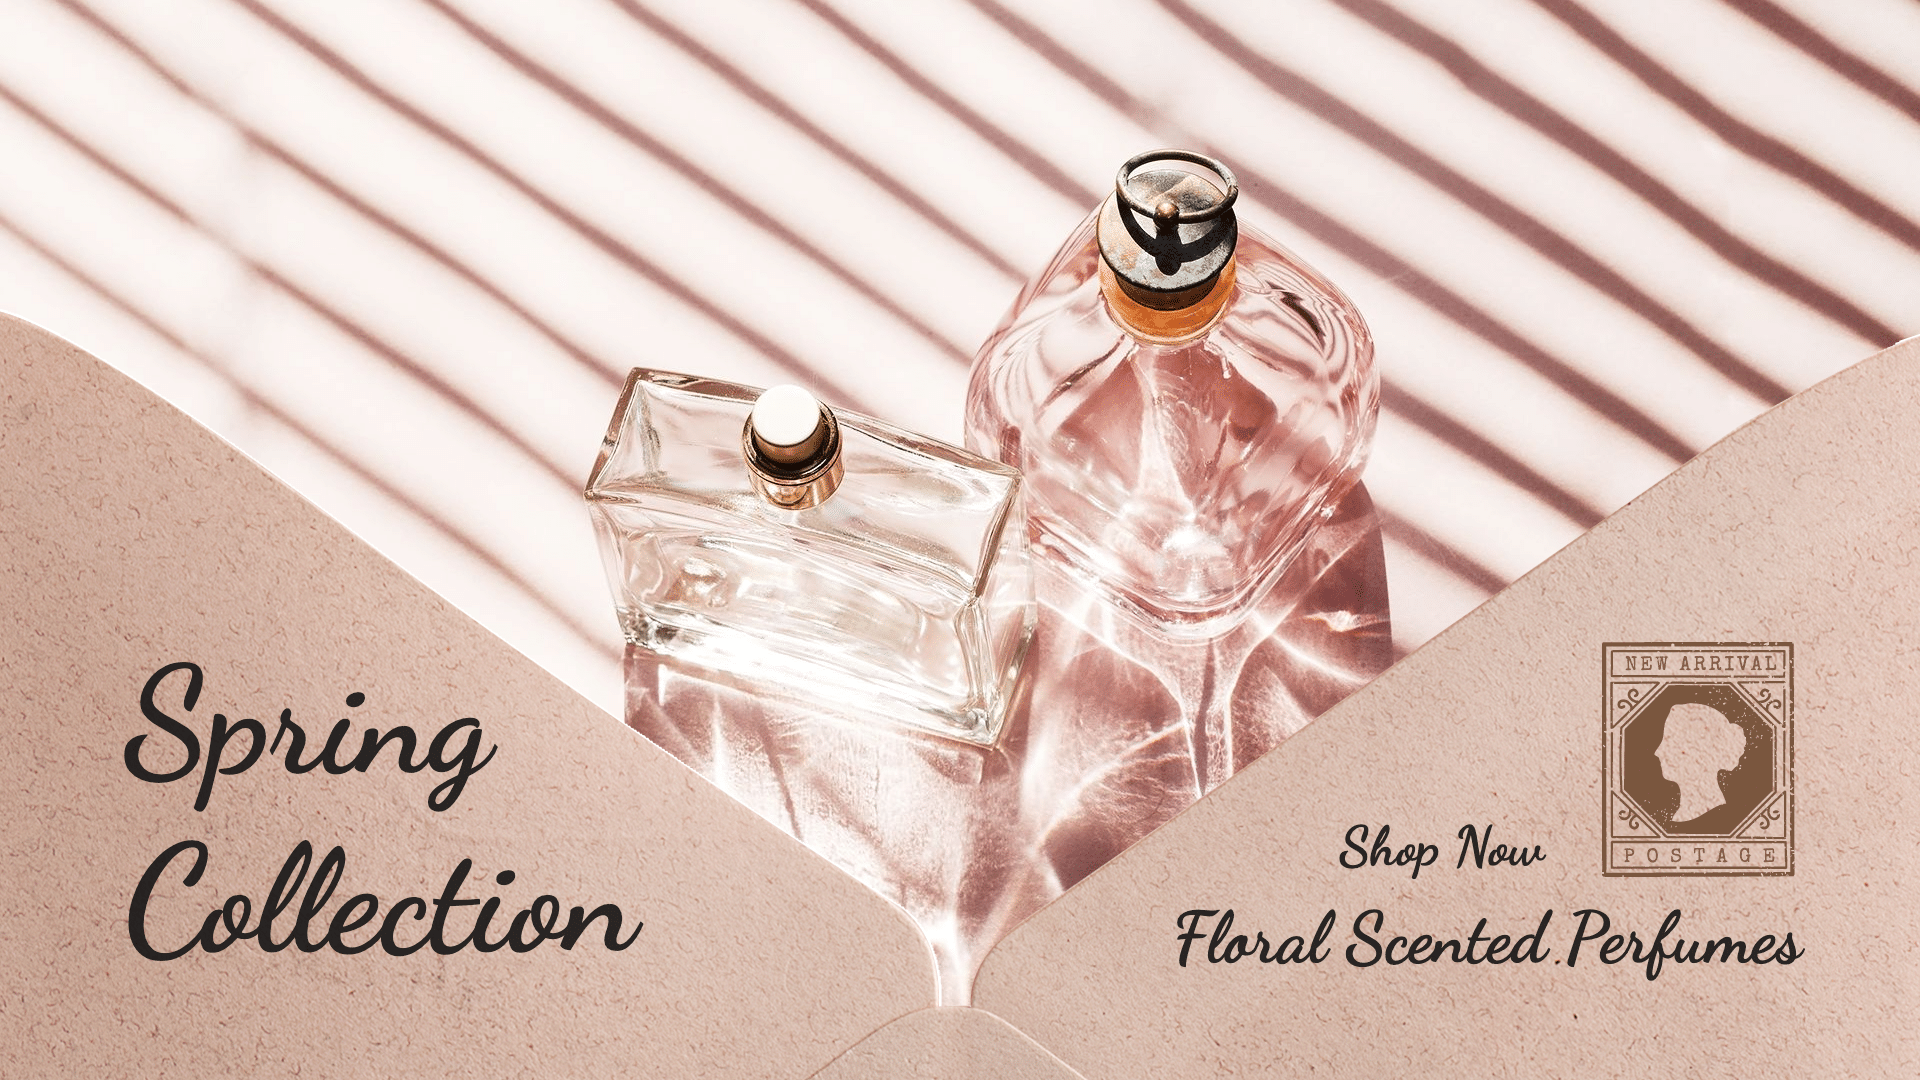 Simple Perfume Spring Collection Ecommerce Banner预览效果